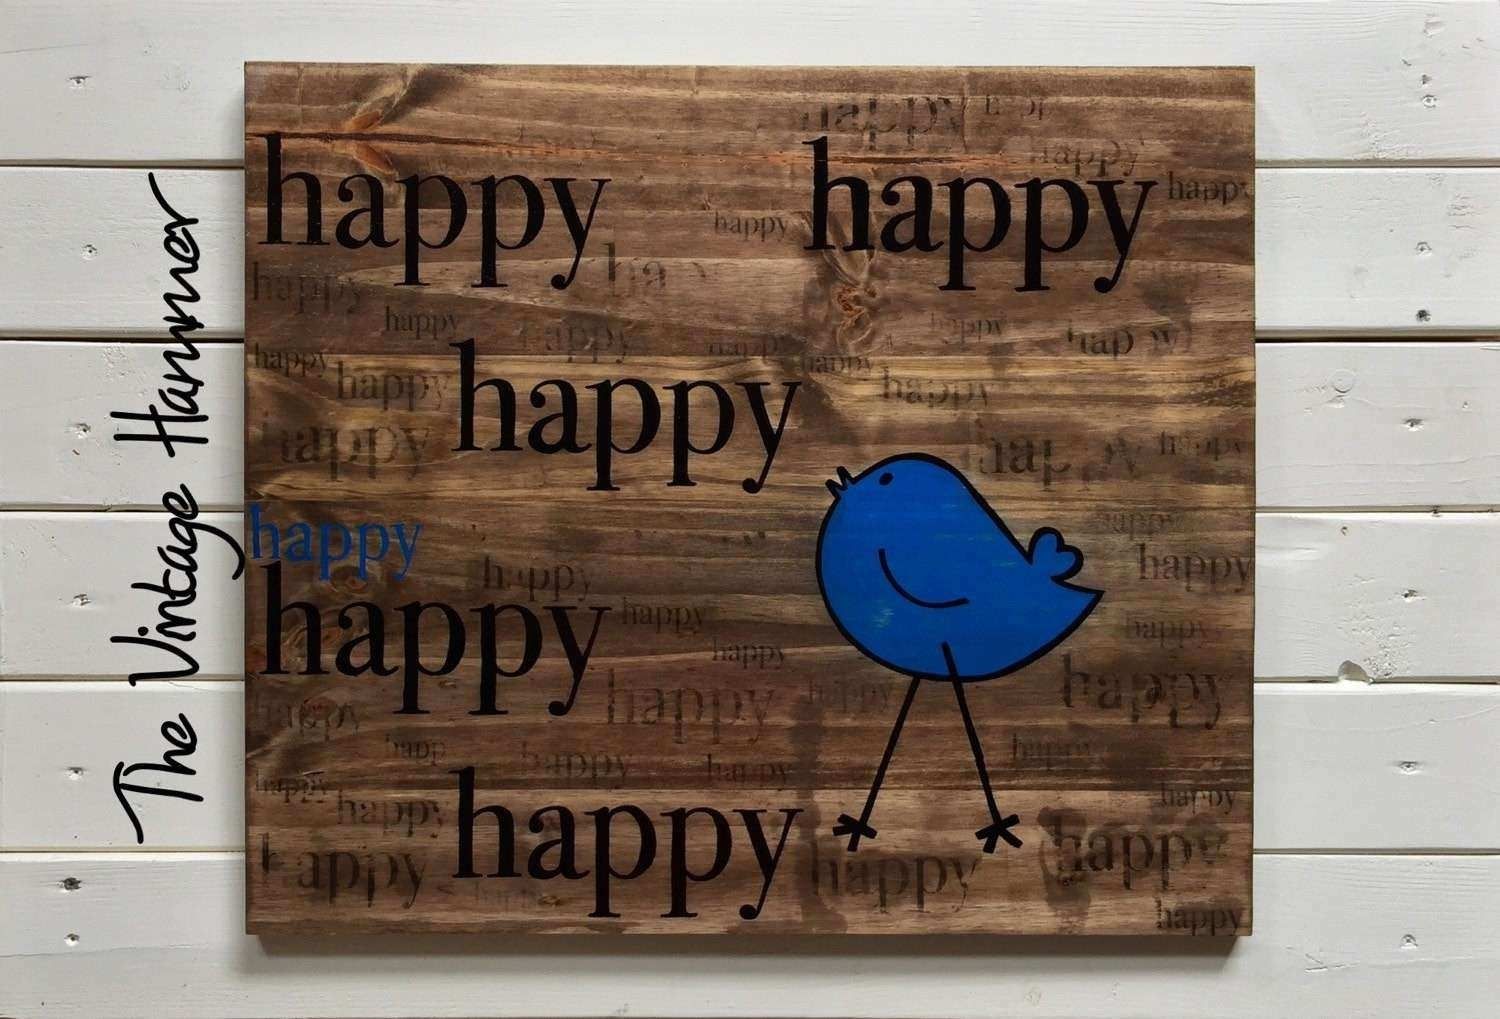 Wall Art Sayings On Wood Lovely Happy Wood Sign Sayings Wall Art Intended For Wood Word Wall Art (View 12 of 20)